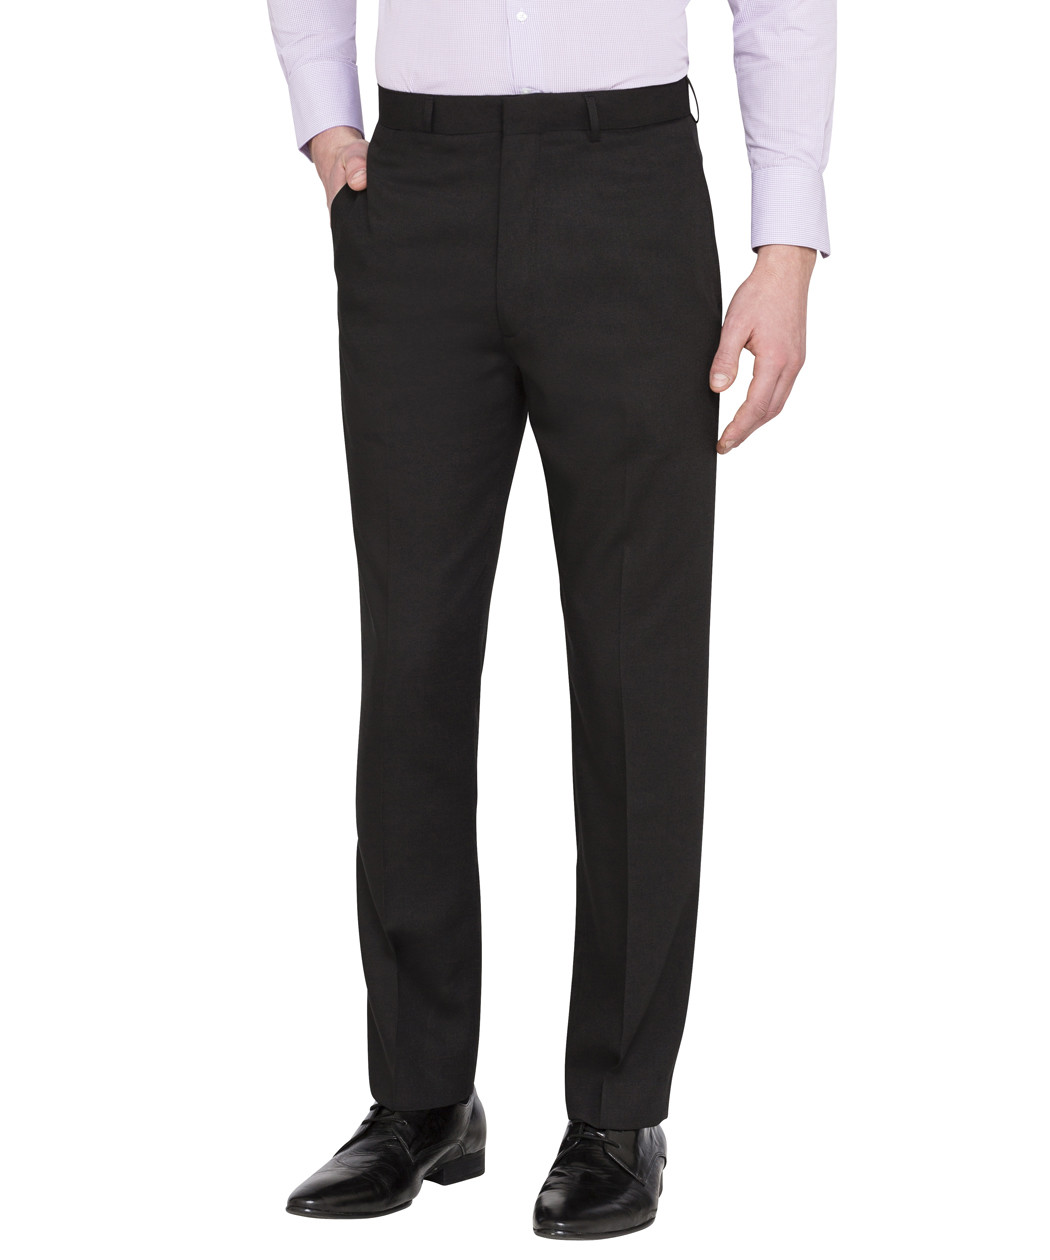 Business Trousers business trousers CRFYTXO